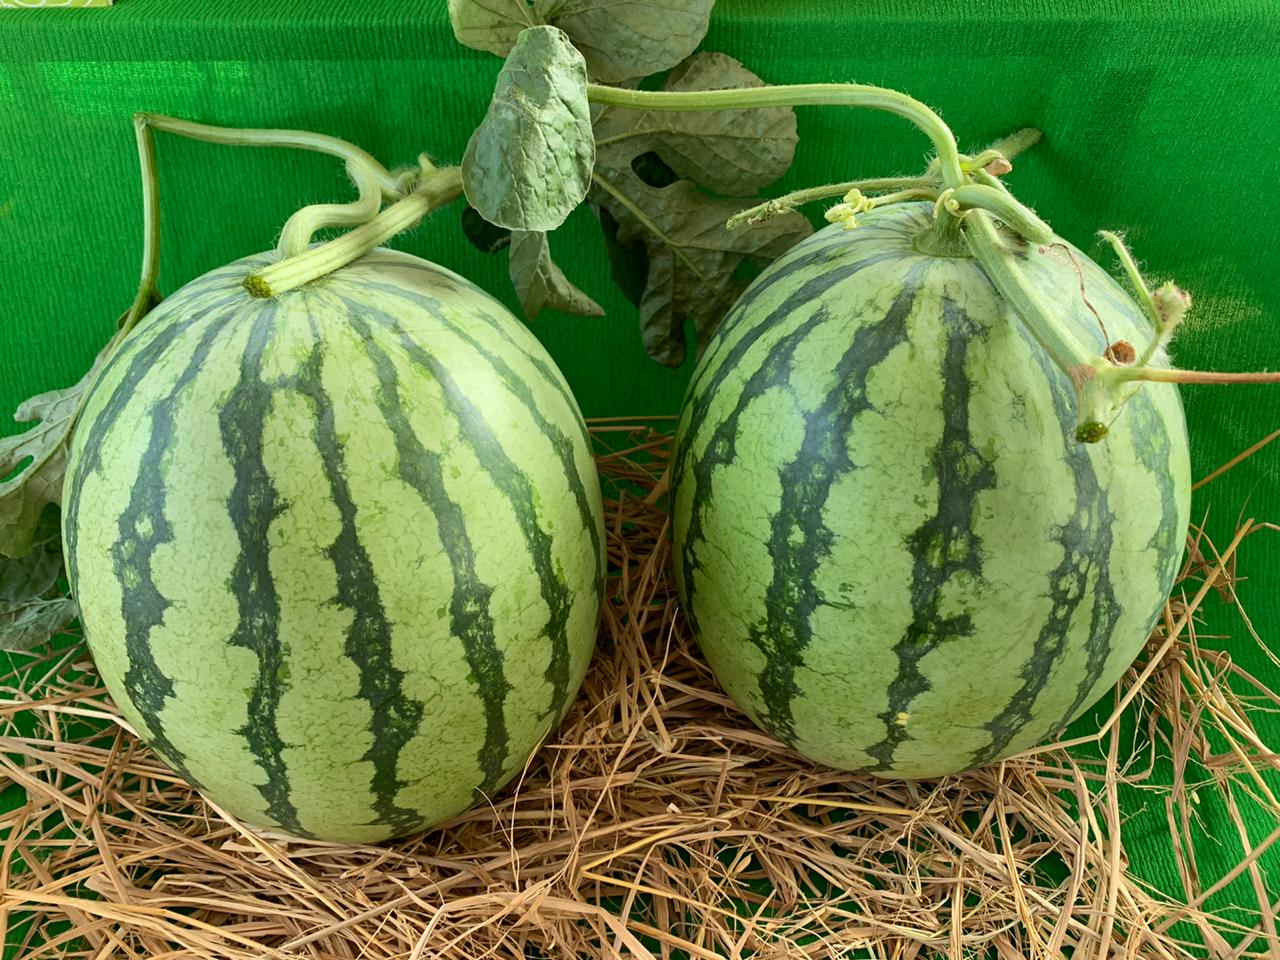 Happy family – 1st Commercial seedless Watermelon hitting the Indian Market!